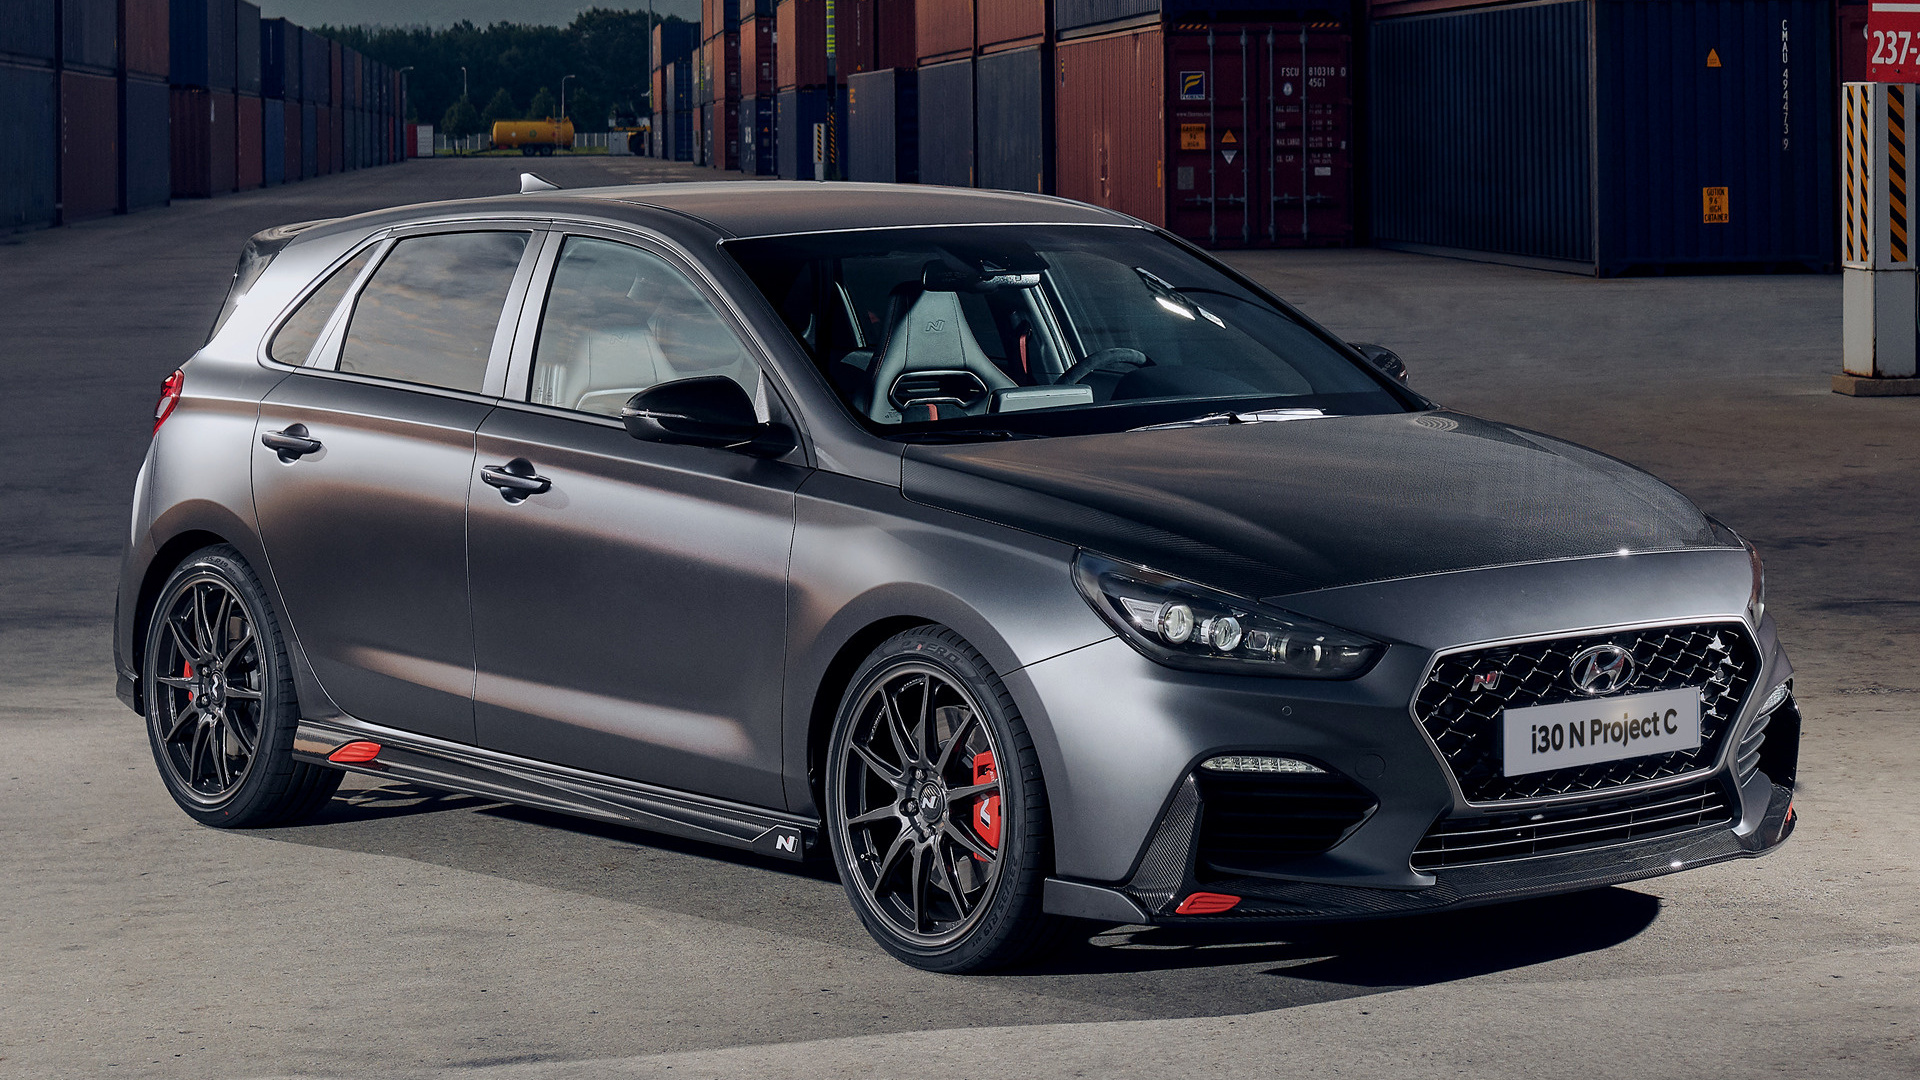 2019 Hyundai i30 N Project C - Wallpapers and HD Images | Car Pixel